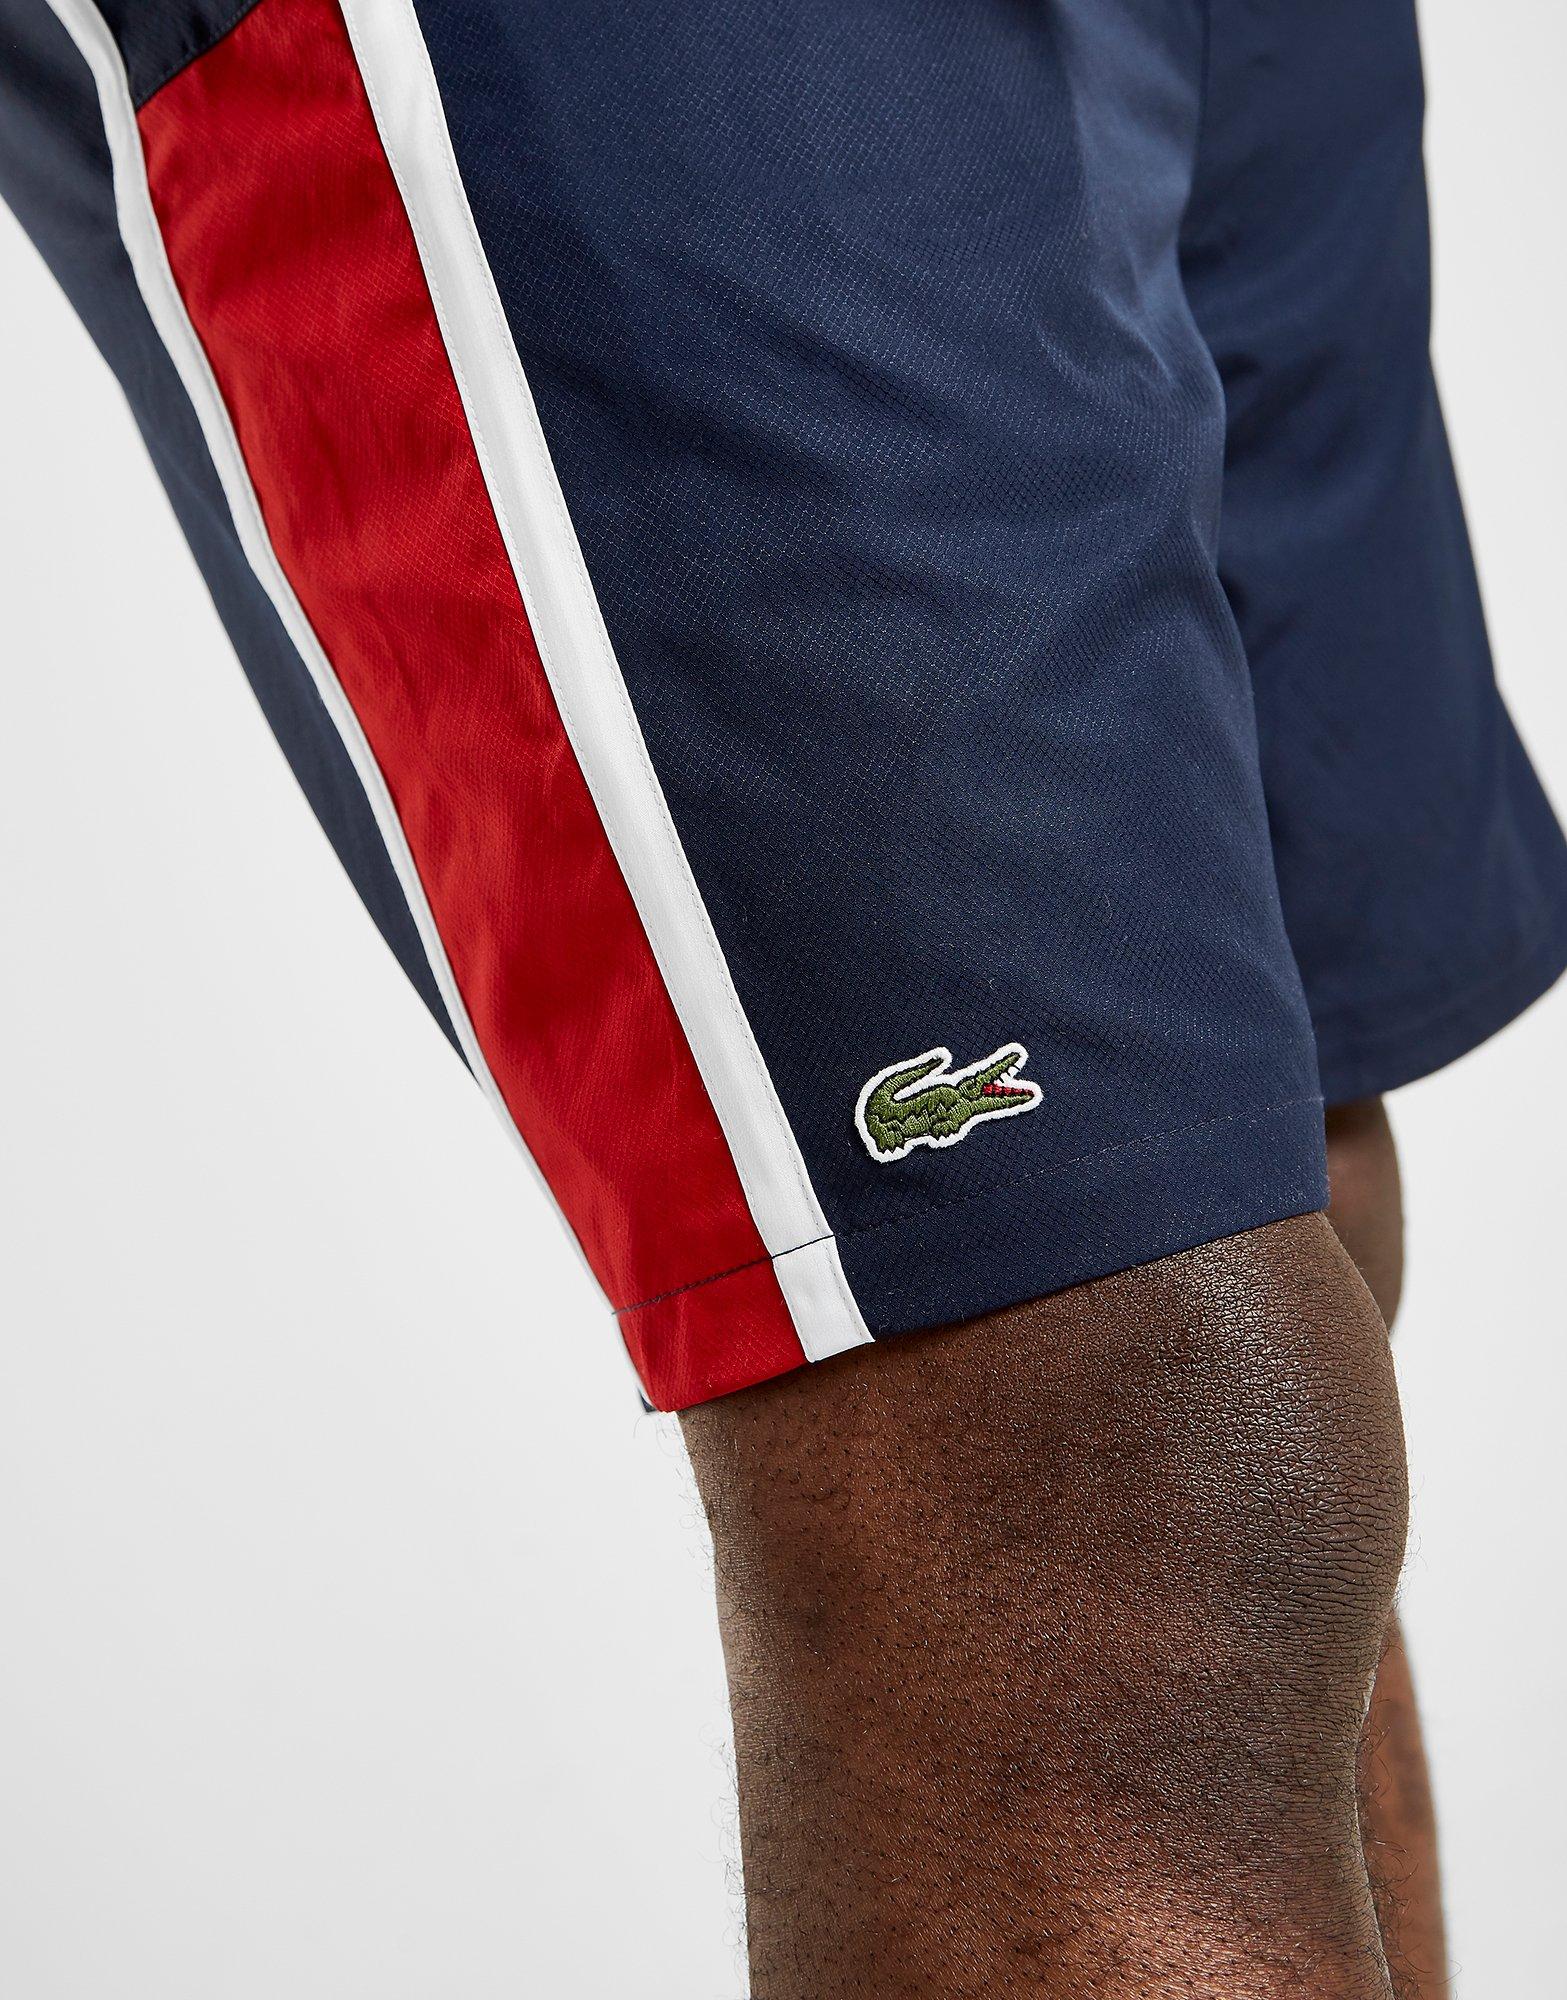 lacoste footing shorts